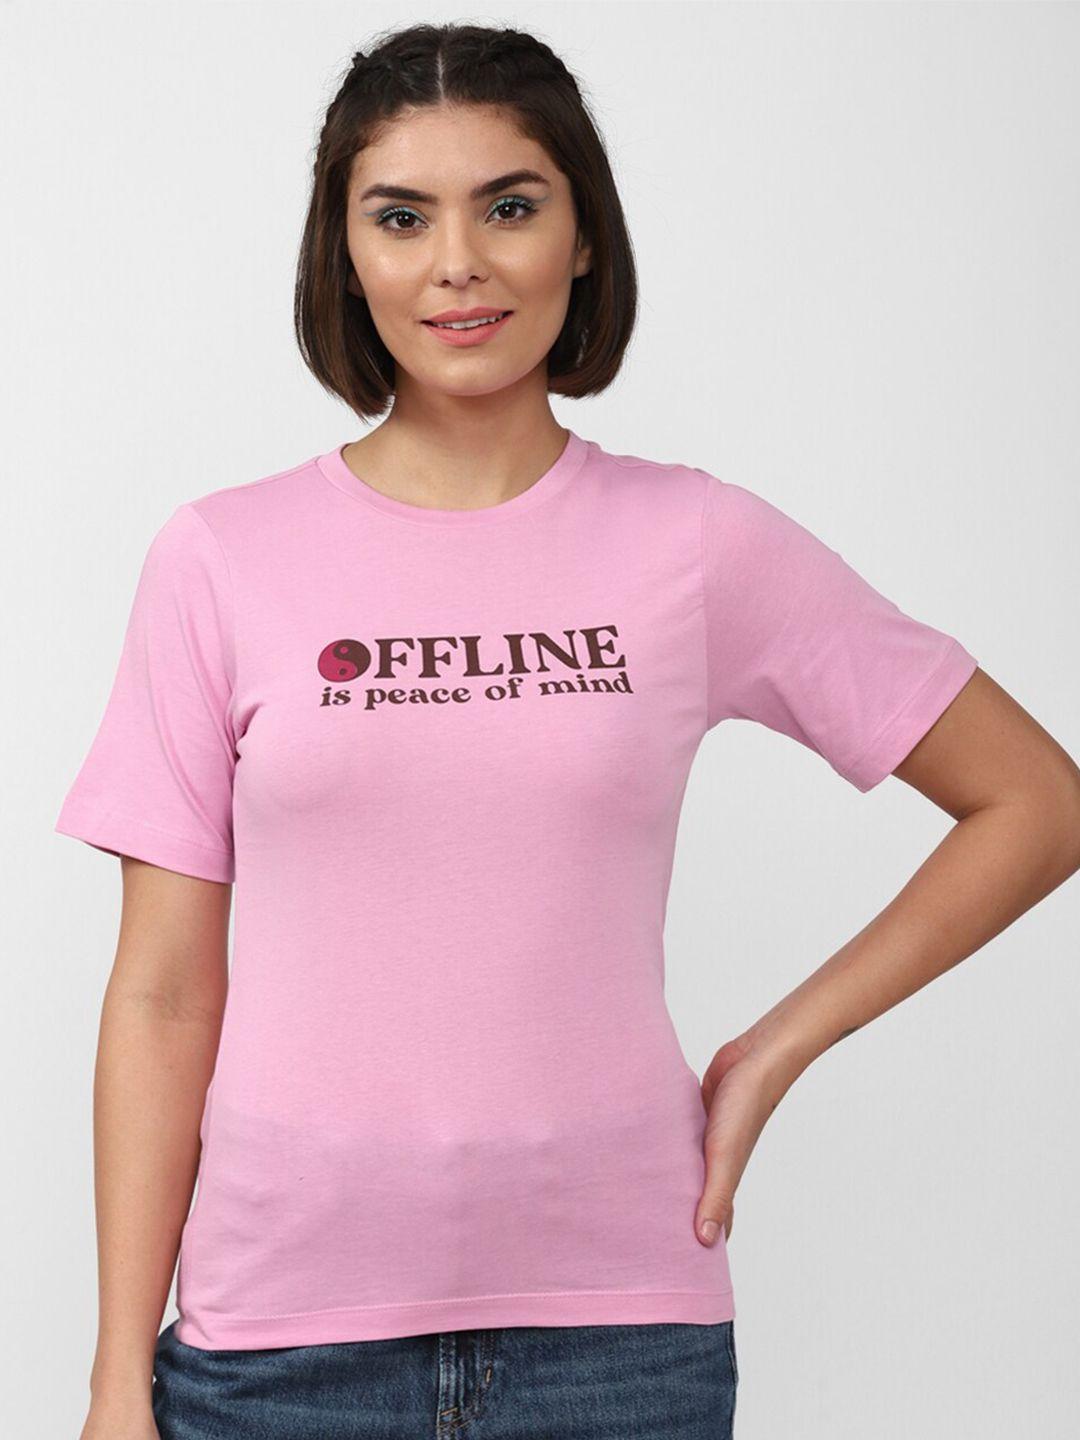 forever-21-women-pink-typography-printed-cotton-t-shirt